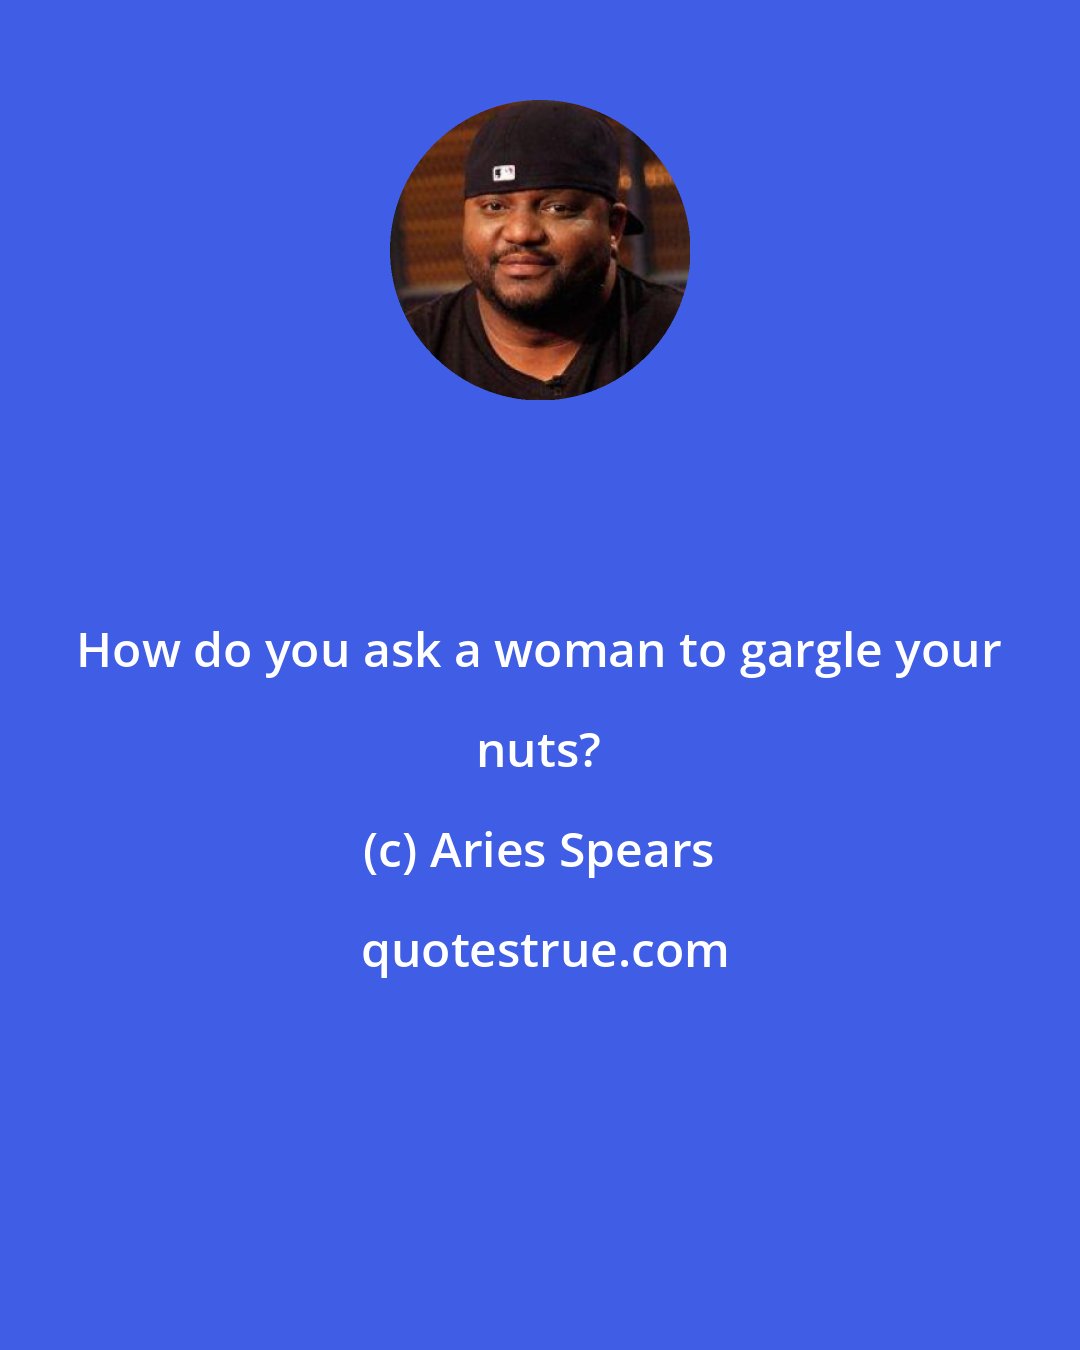 Aries Spears: How do you ask a woman to gargle your nuts?